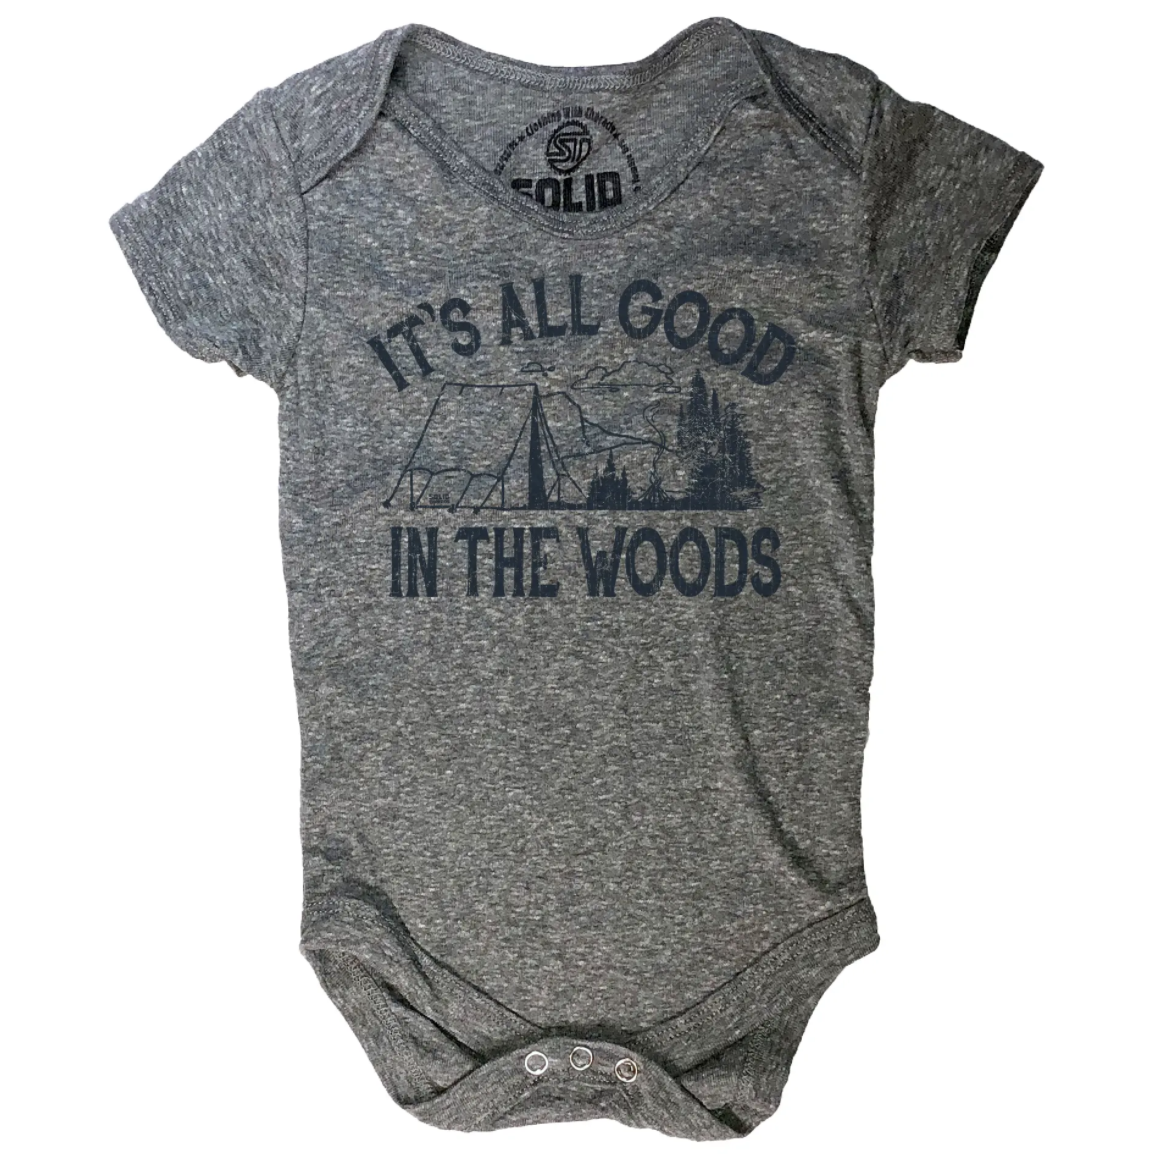 All Good in the Woods Cotton Baby Onesie Grey